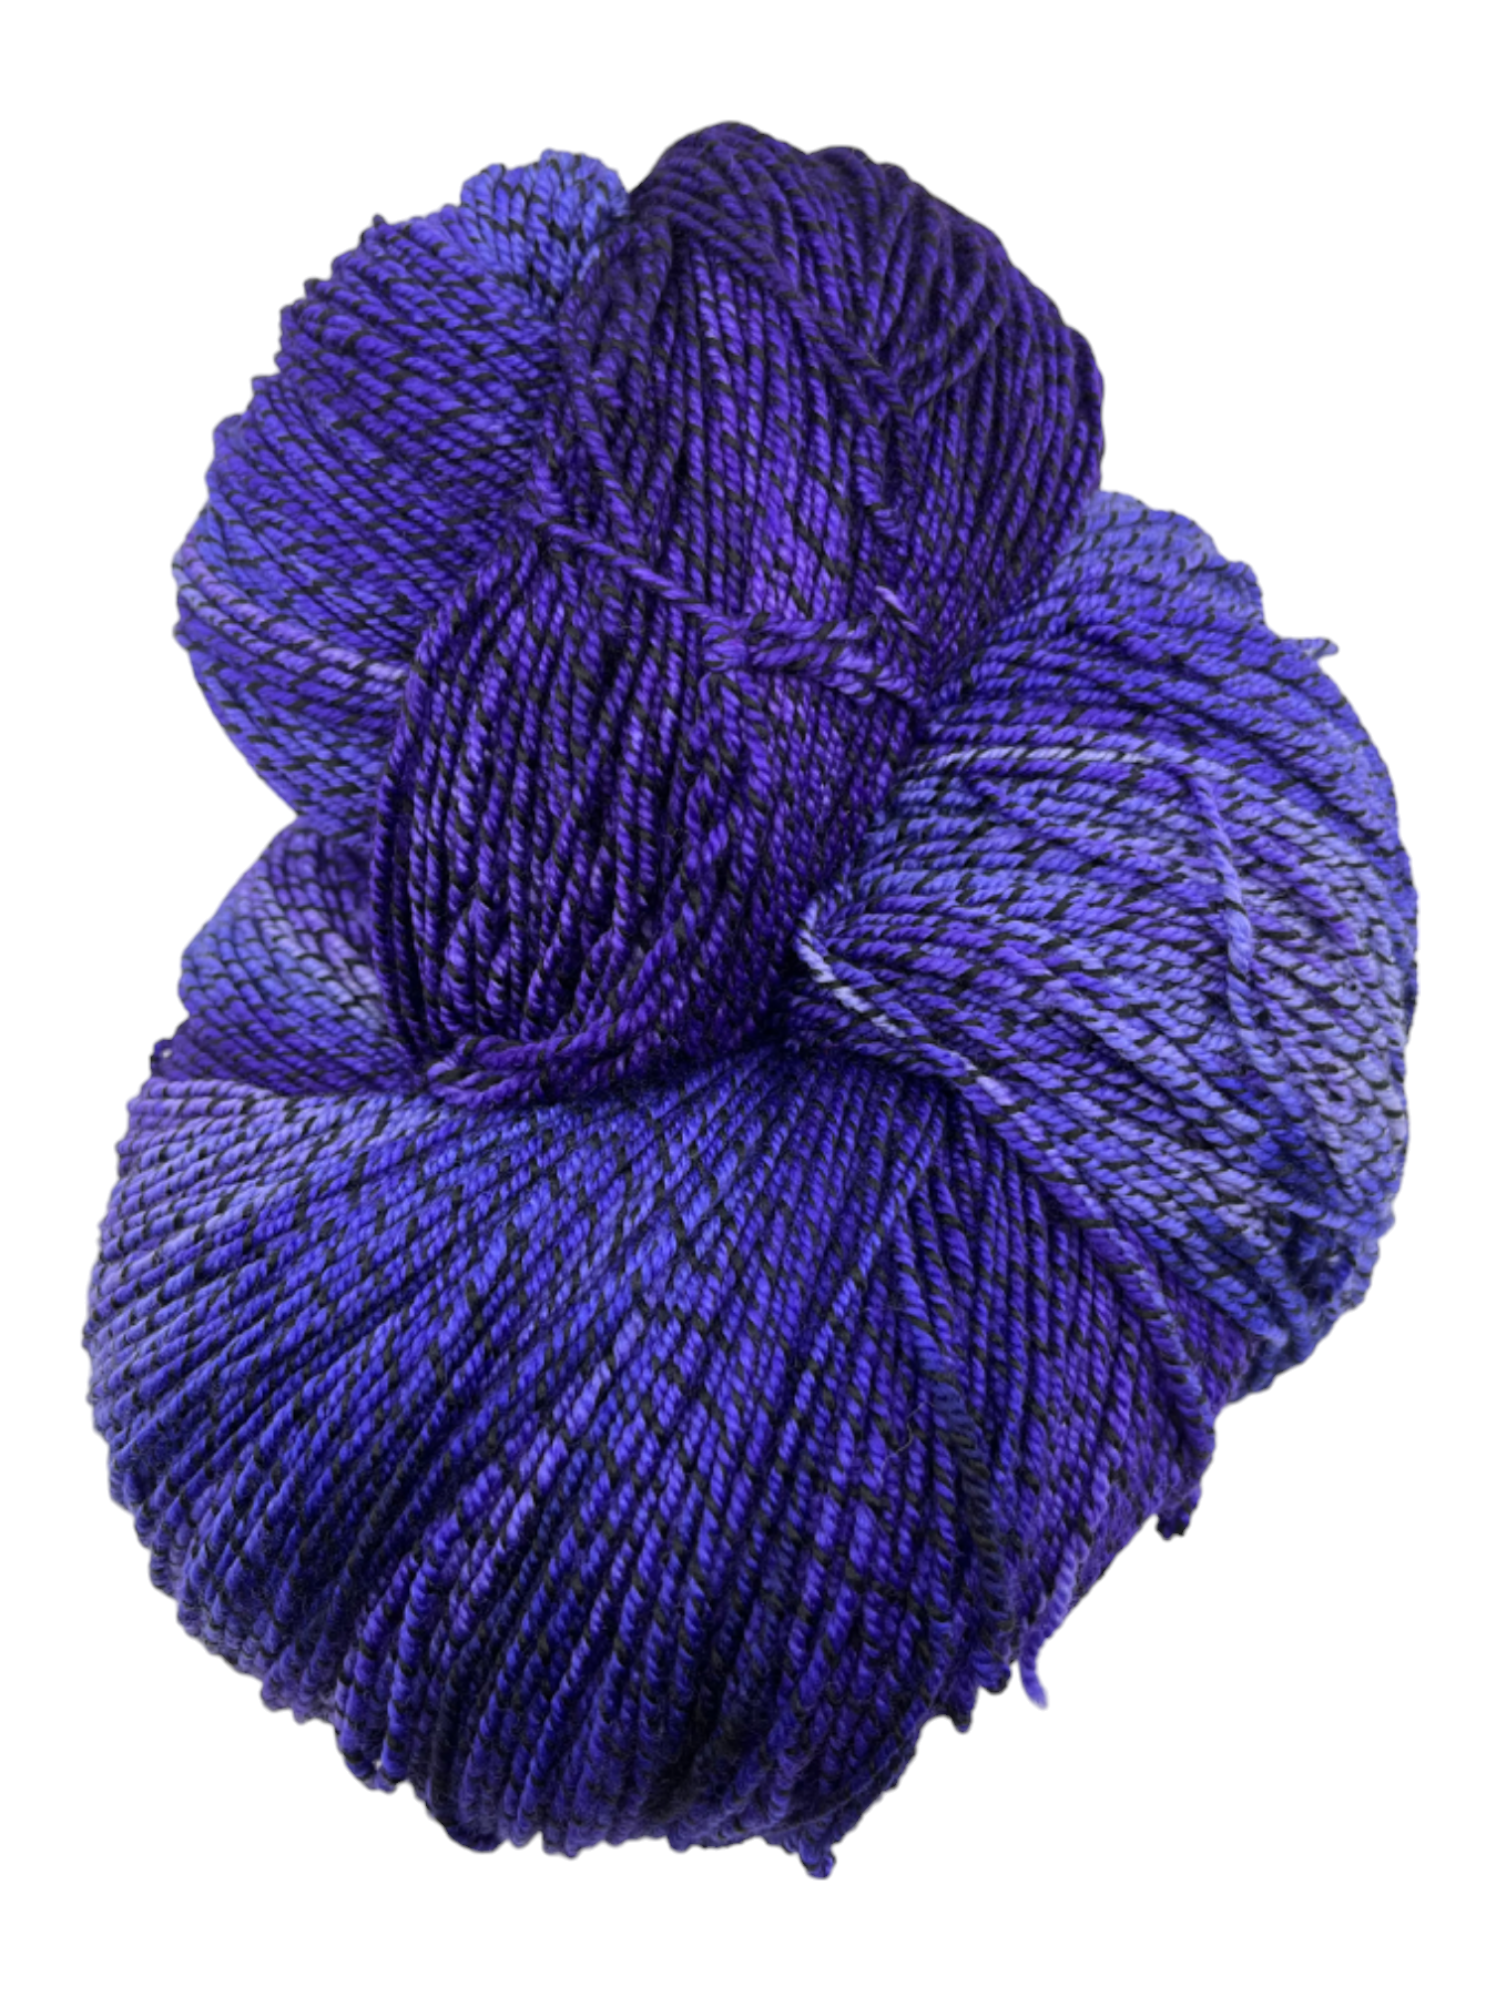 Nightshade Worsted Queen Size 30